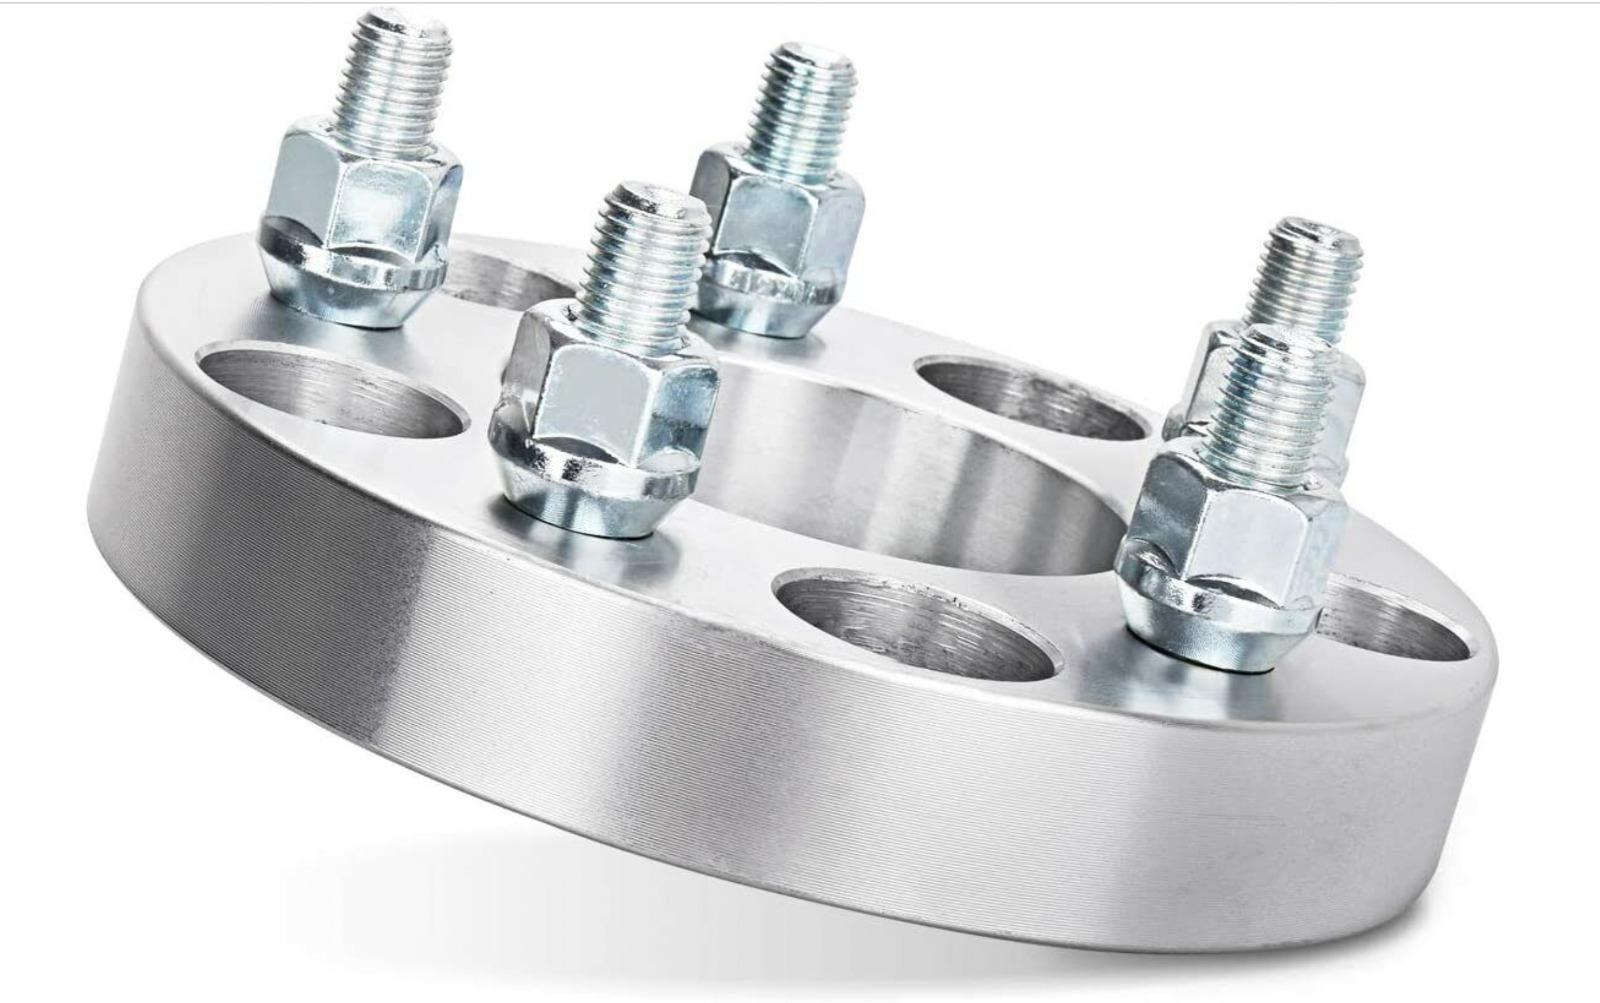 5x4.5 to 5x5 Wheel Adapters 1.25